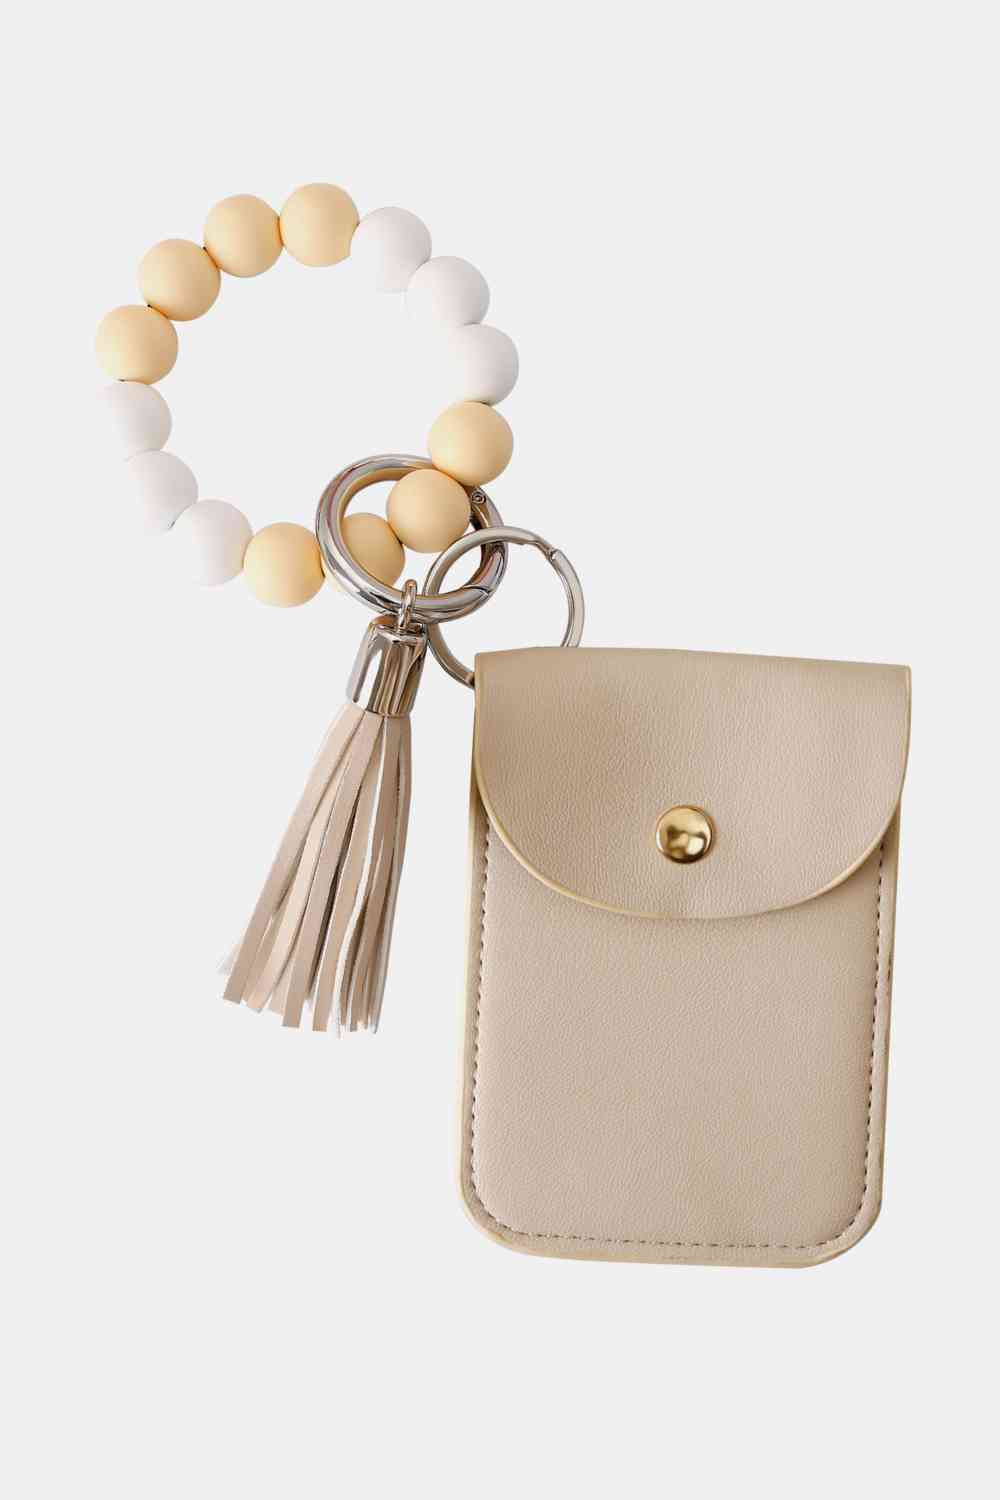 Beaded Wristlet Key Chain with Wallet